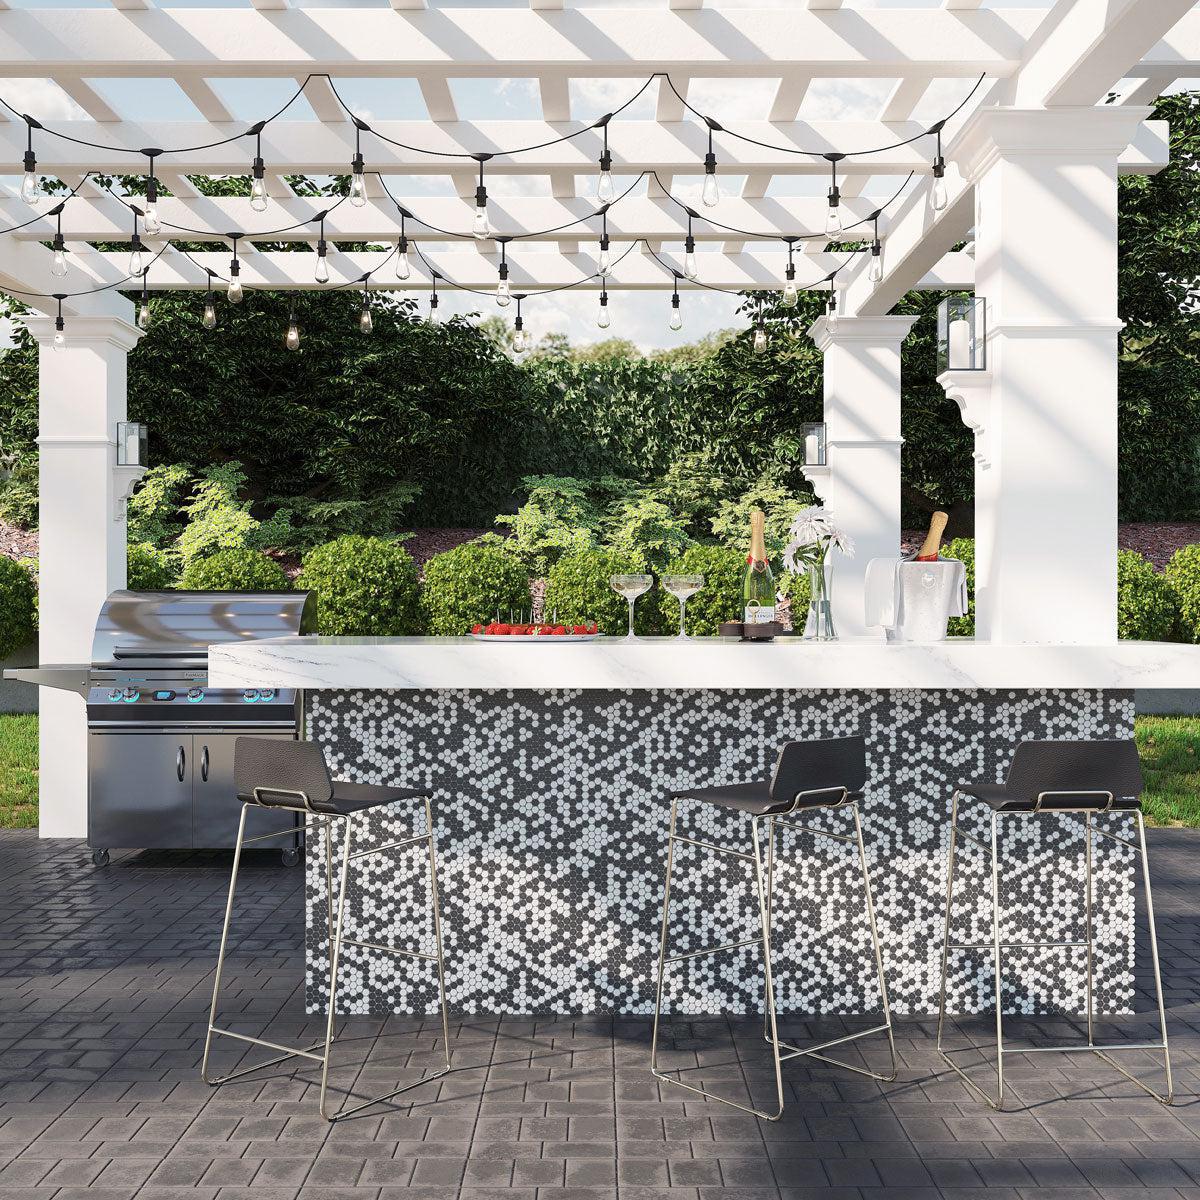 Black and White Mix Penny Round Tile for an Outdoor Kitchen Bar and BBQ